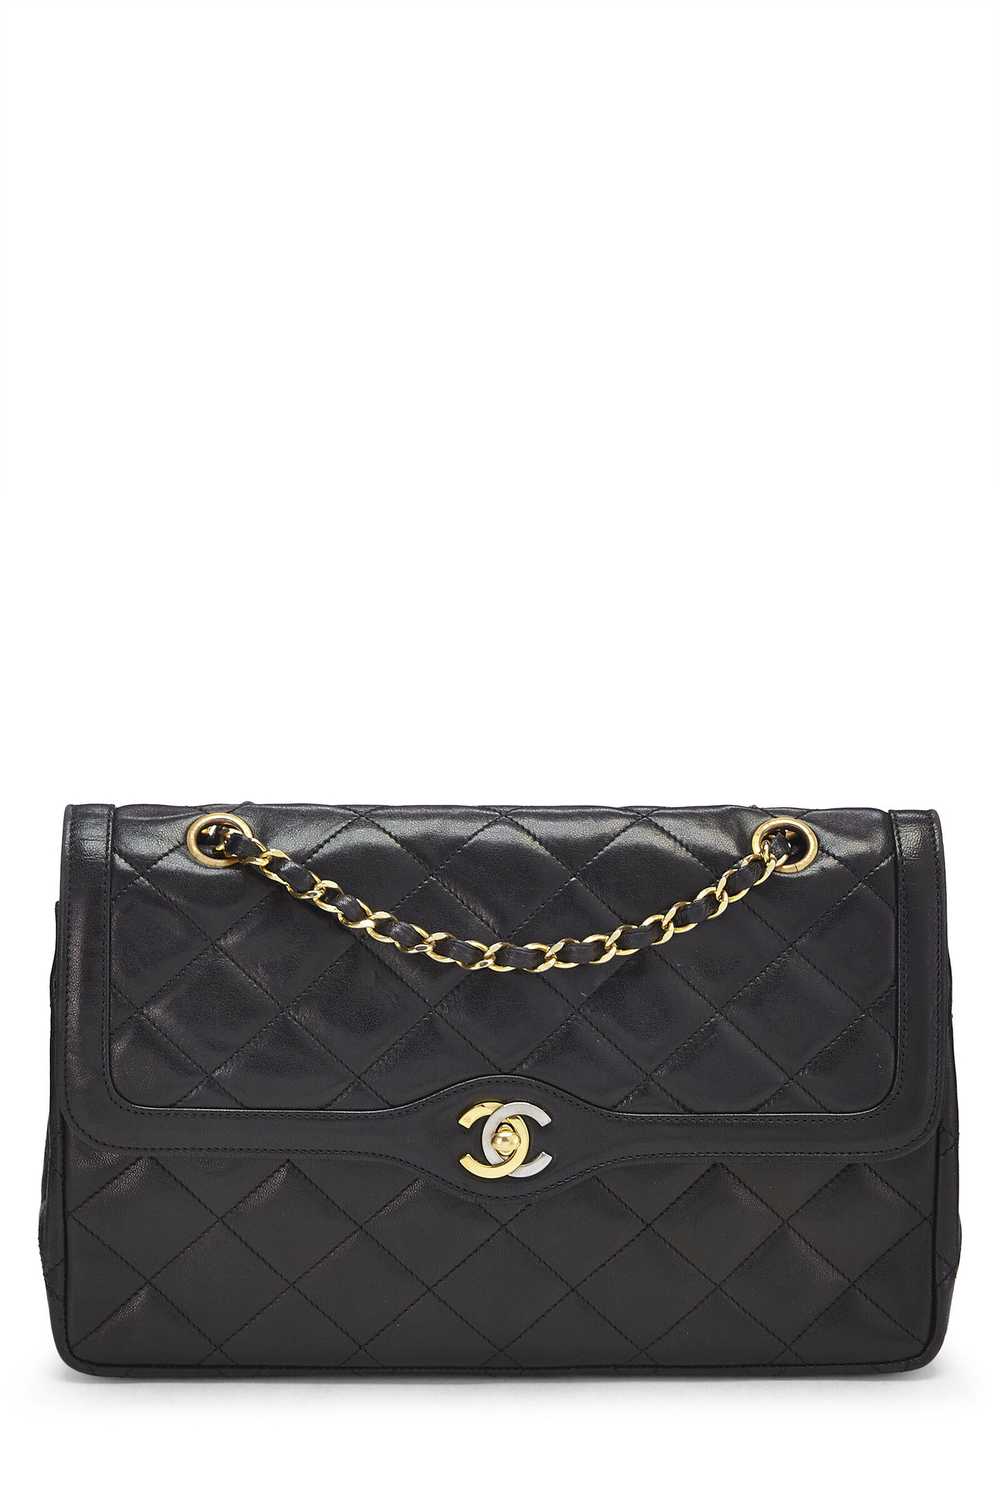 Black Quilted Lambskin Paris Limited Double Flap … - image 1